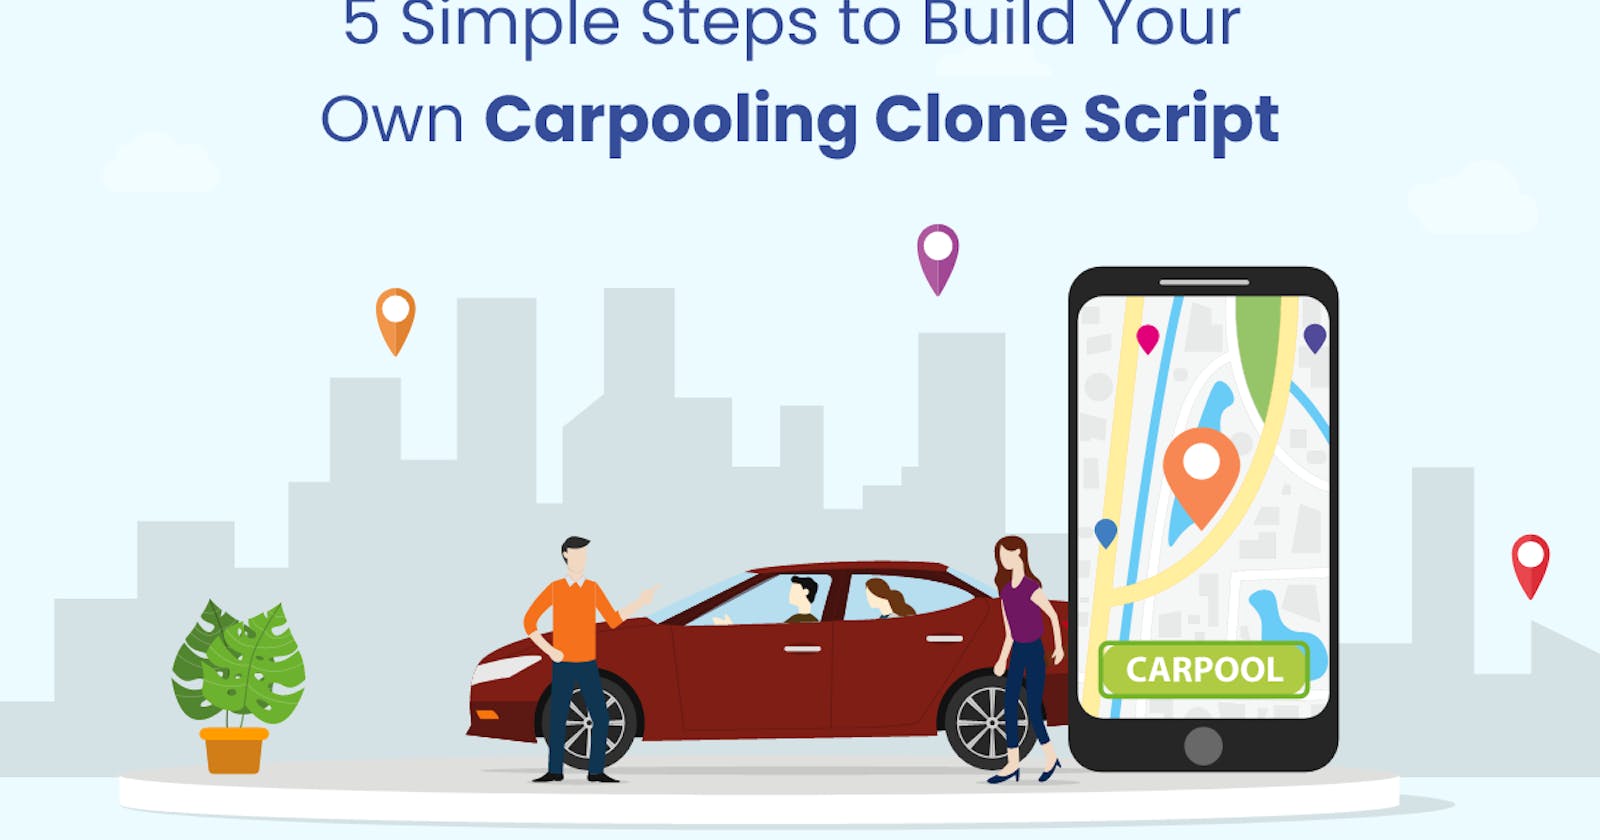 5 Simple Steps to Build Your Own Carpooling Clone Script